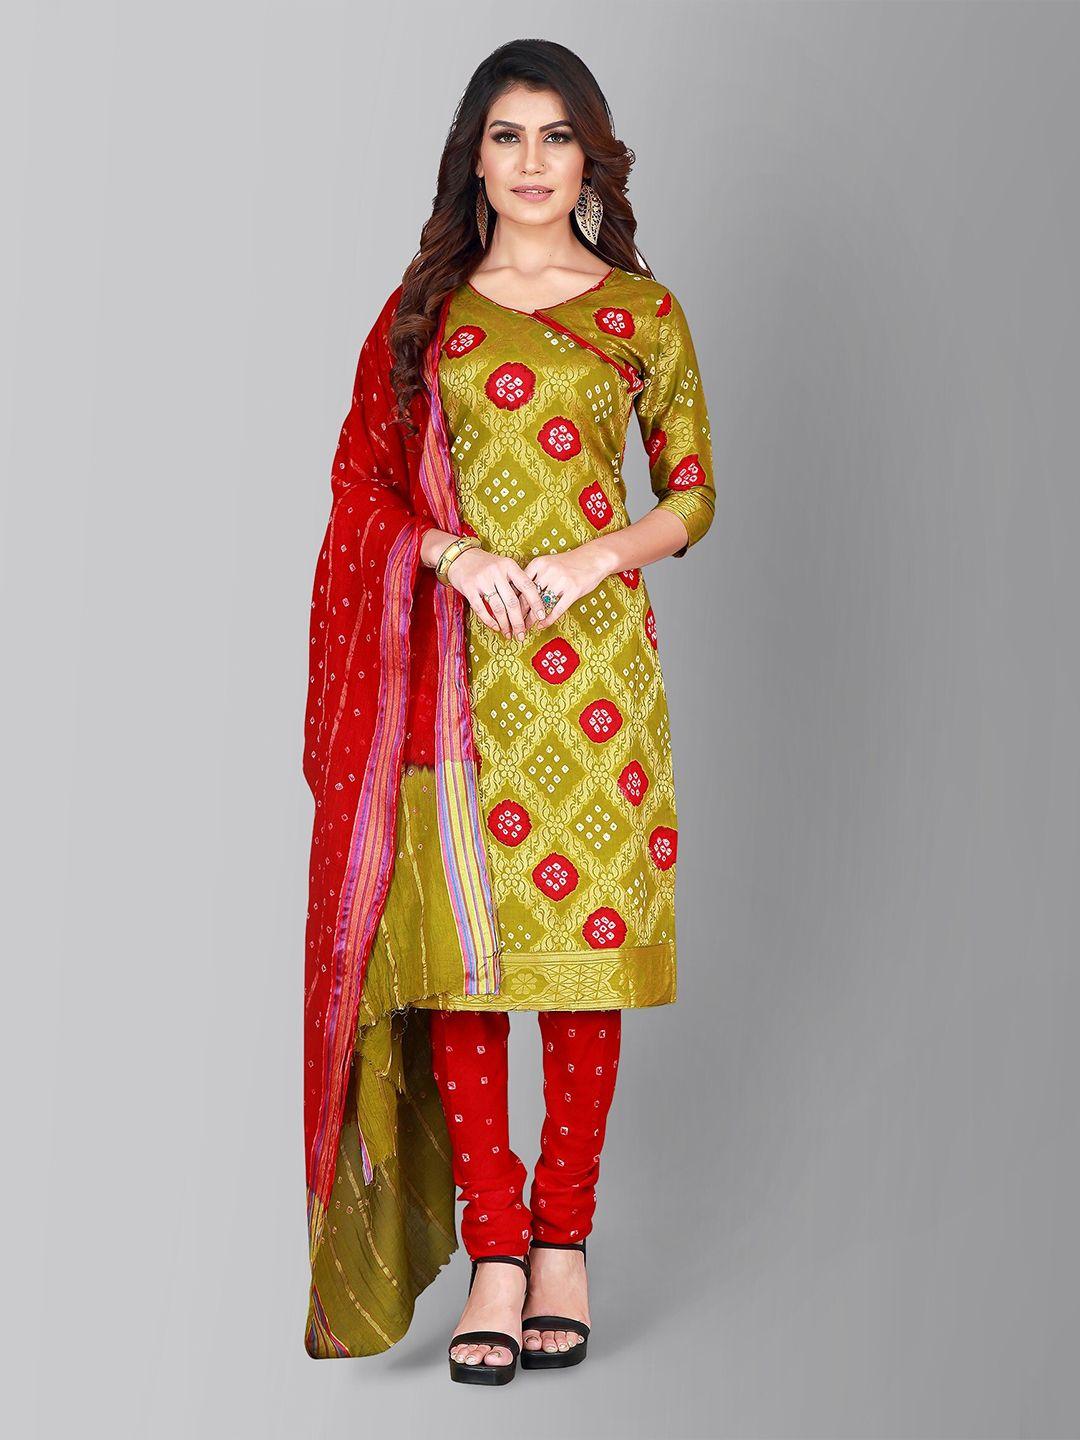 divine-international-trading-co-olive-green-&-red-dyed-unstitched-dress-material